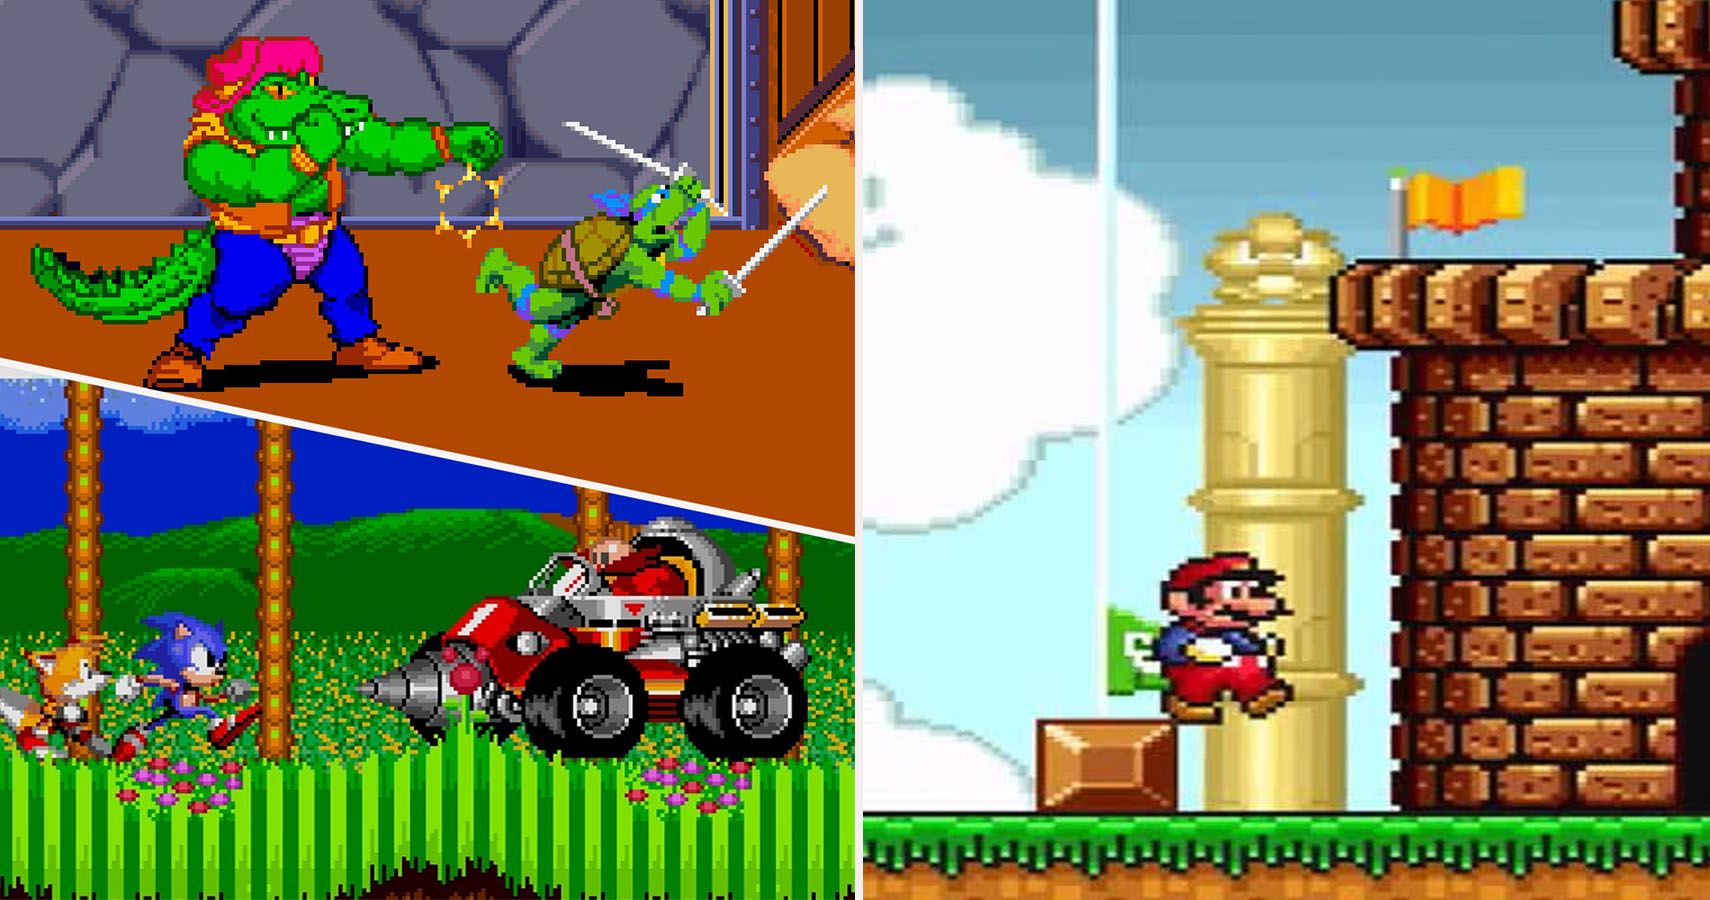 21 Classic 90s Video Games That Are Impossible To Beat